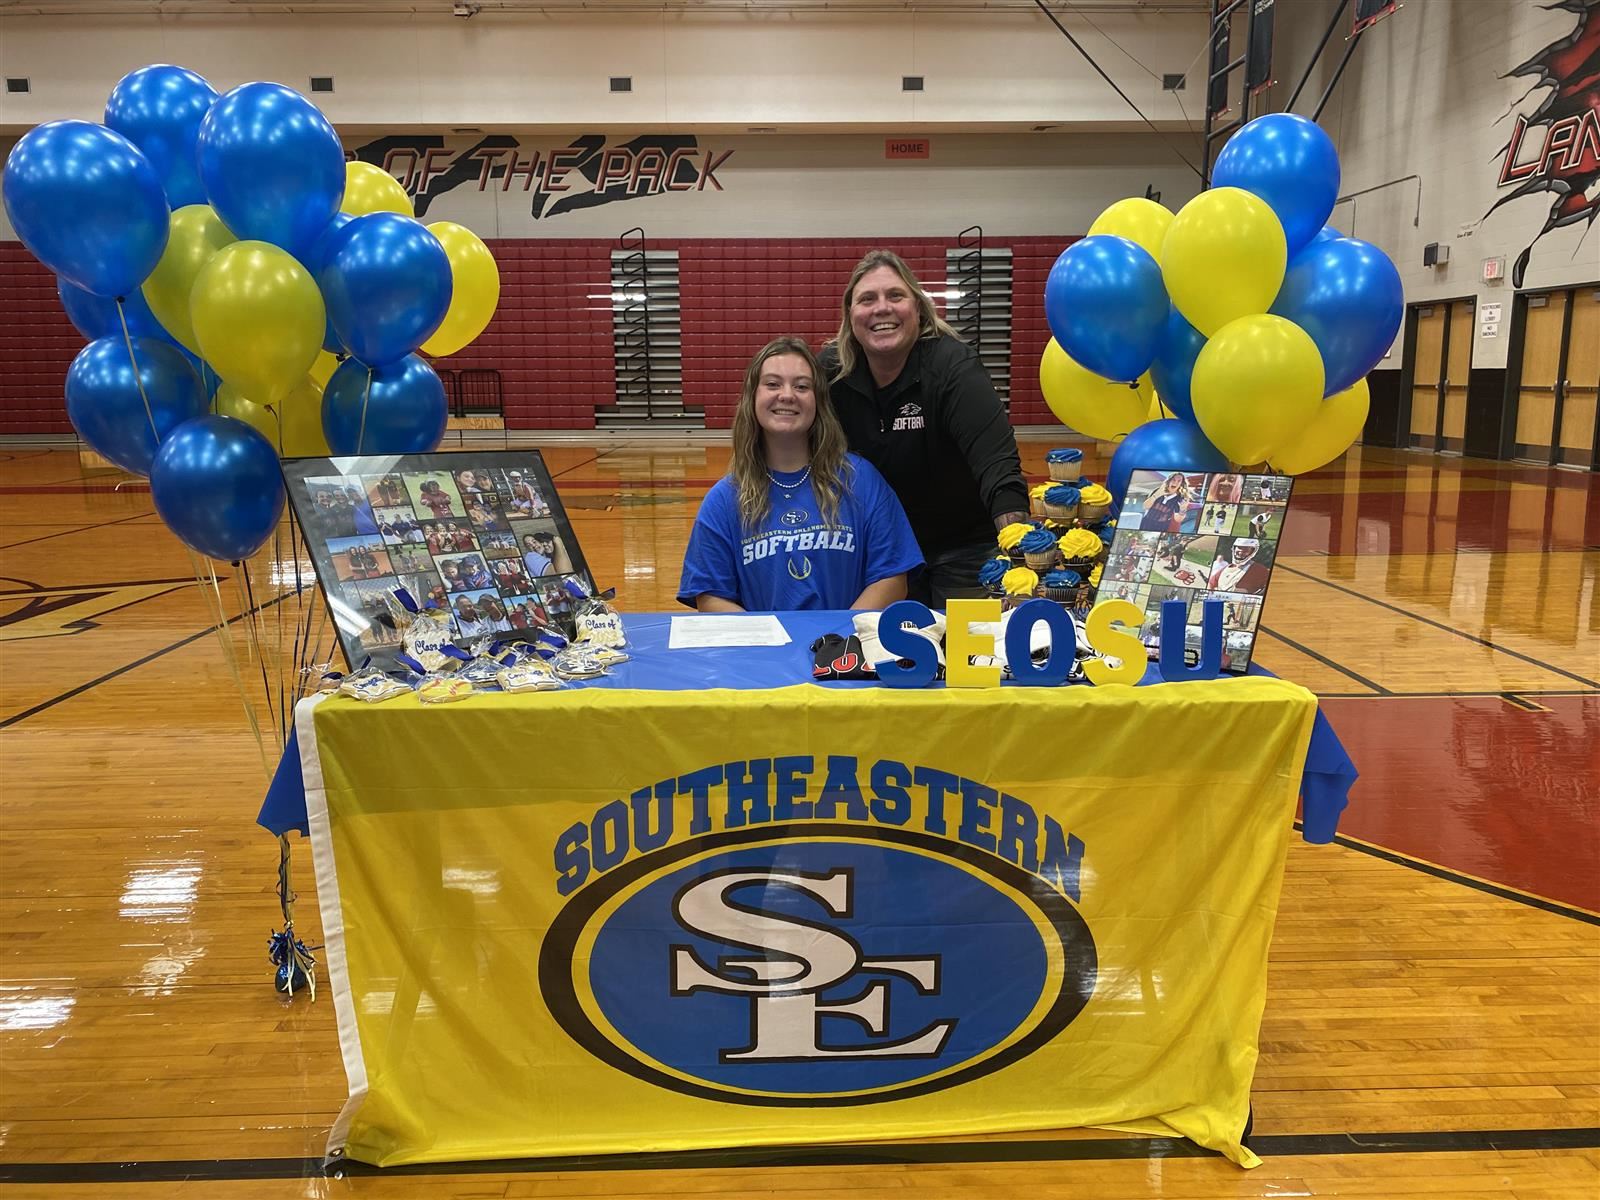 Langham Creek senior Kasey Simmons, seated, signed a letter of intent to Southeastern Oklahoma State University.